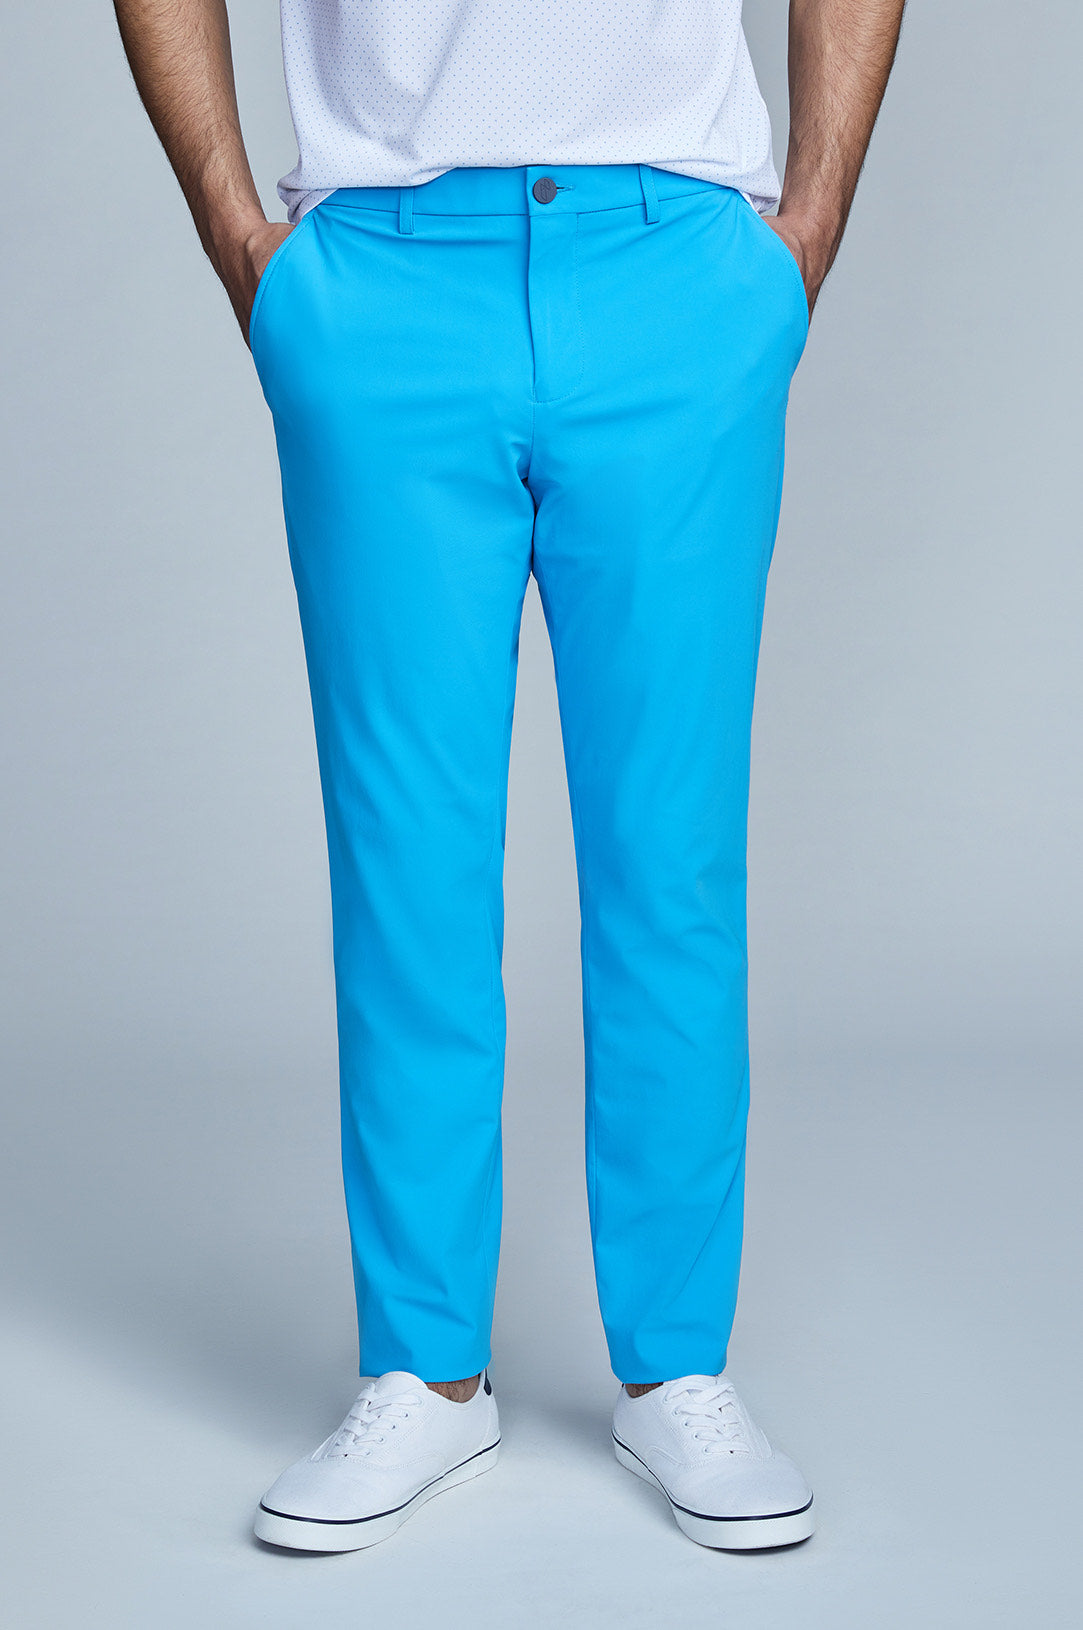 Buy The Souled Store Solids: Stellar Mens and Boys Regular Fit Blue Color  Cargo Pants at Amazon.in